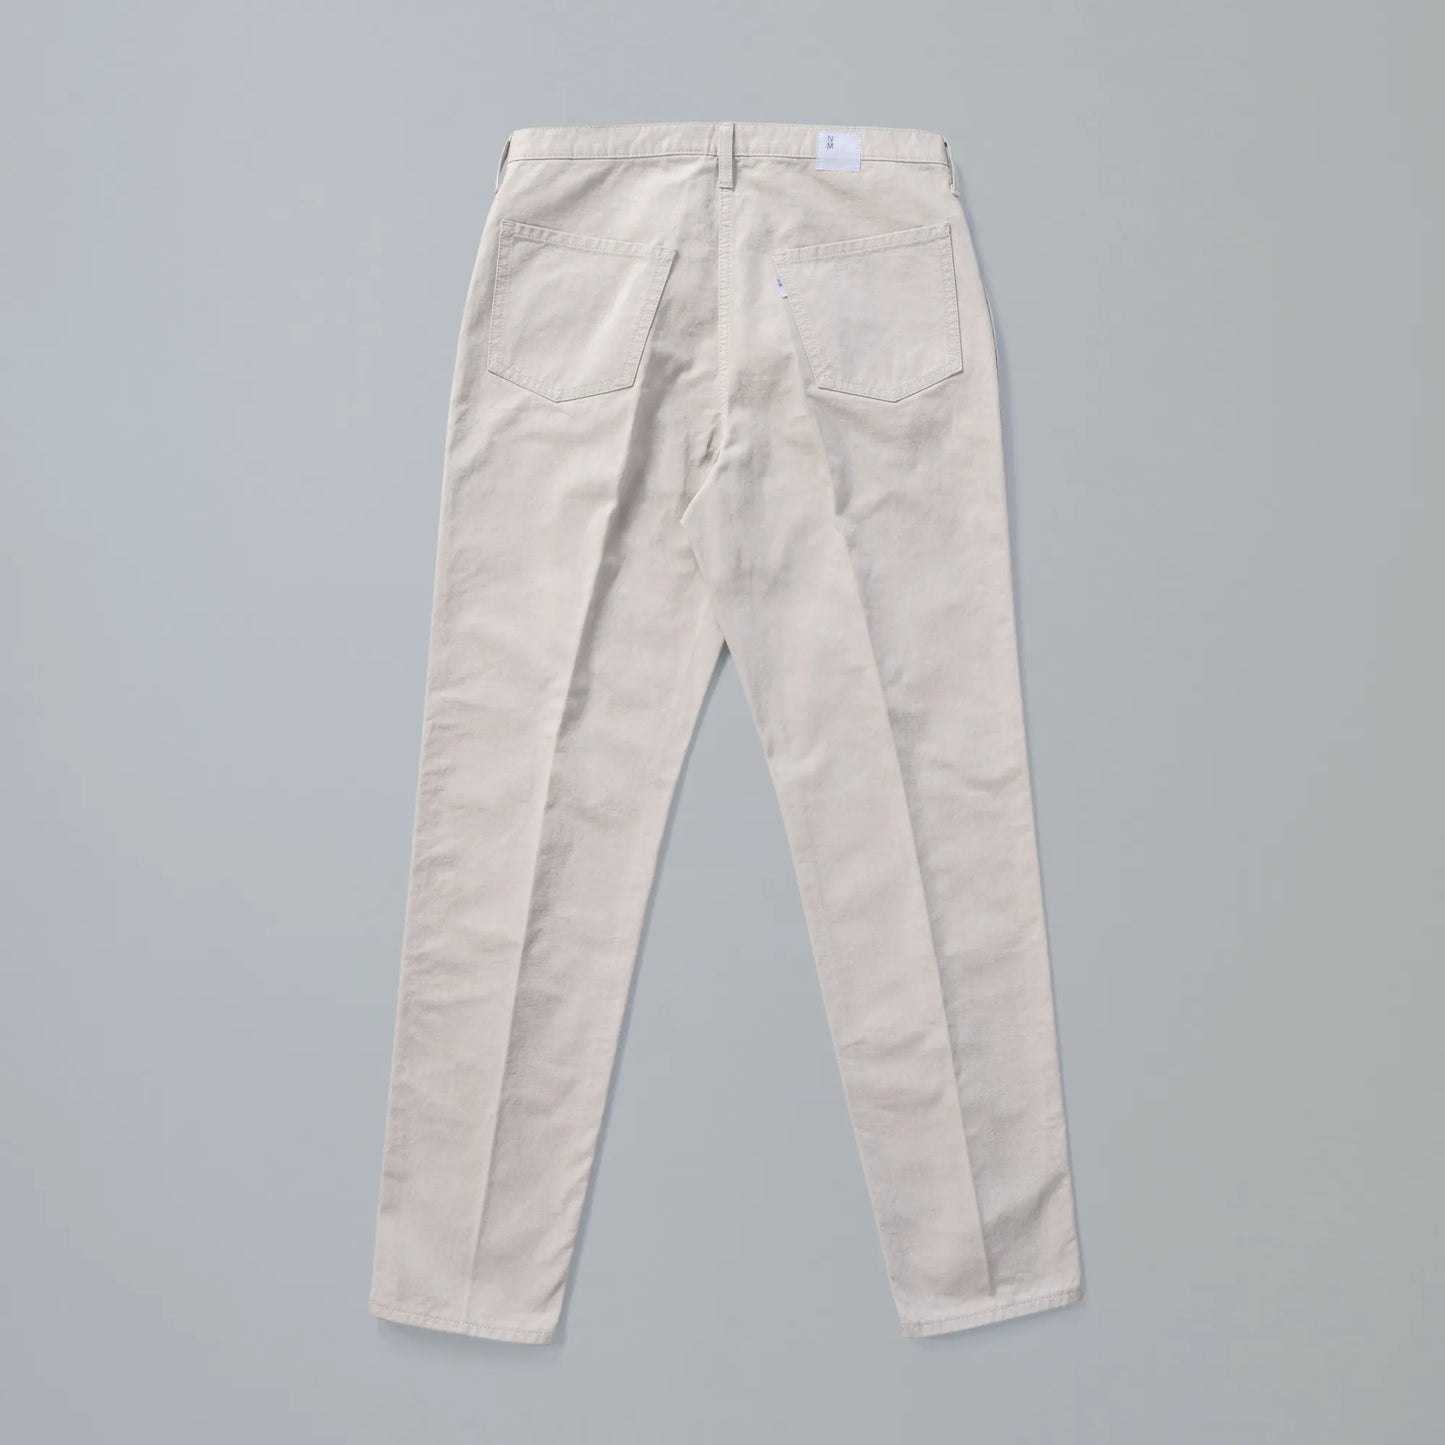 #022 LV MCQUEEN PANTS ONE-WASHED IDG